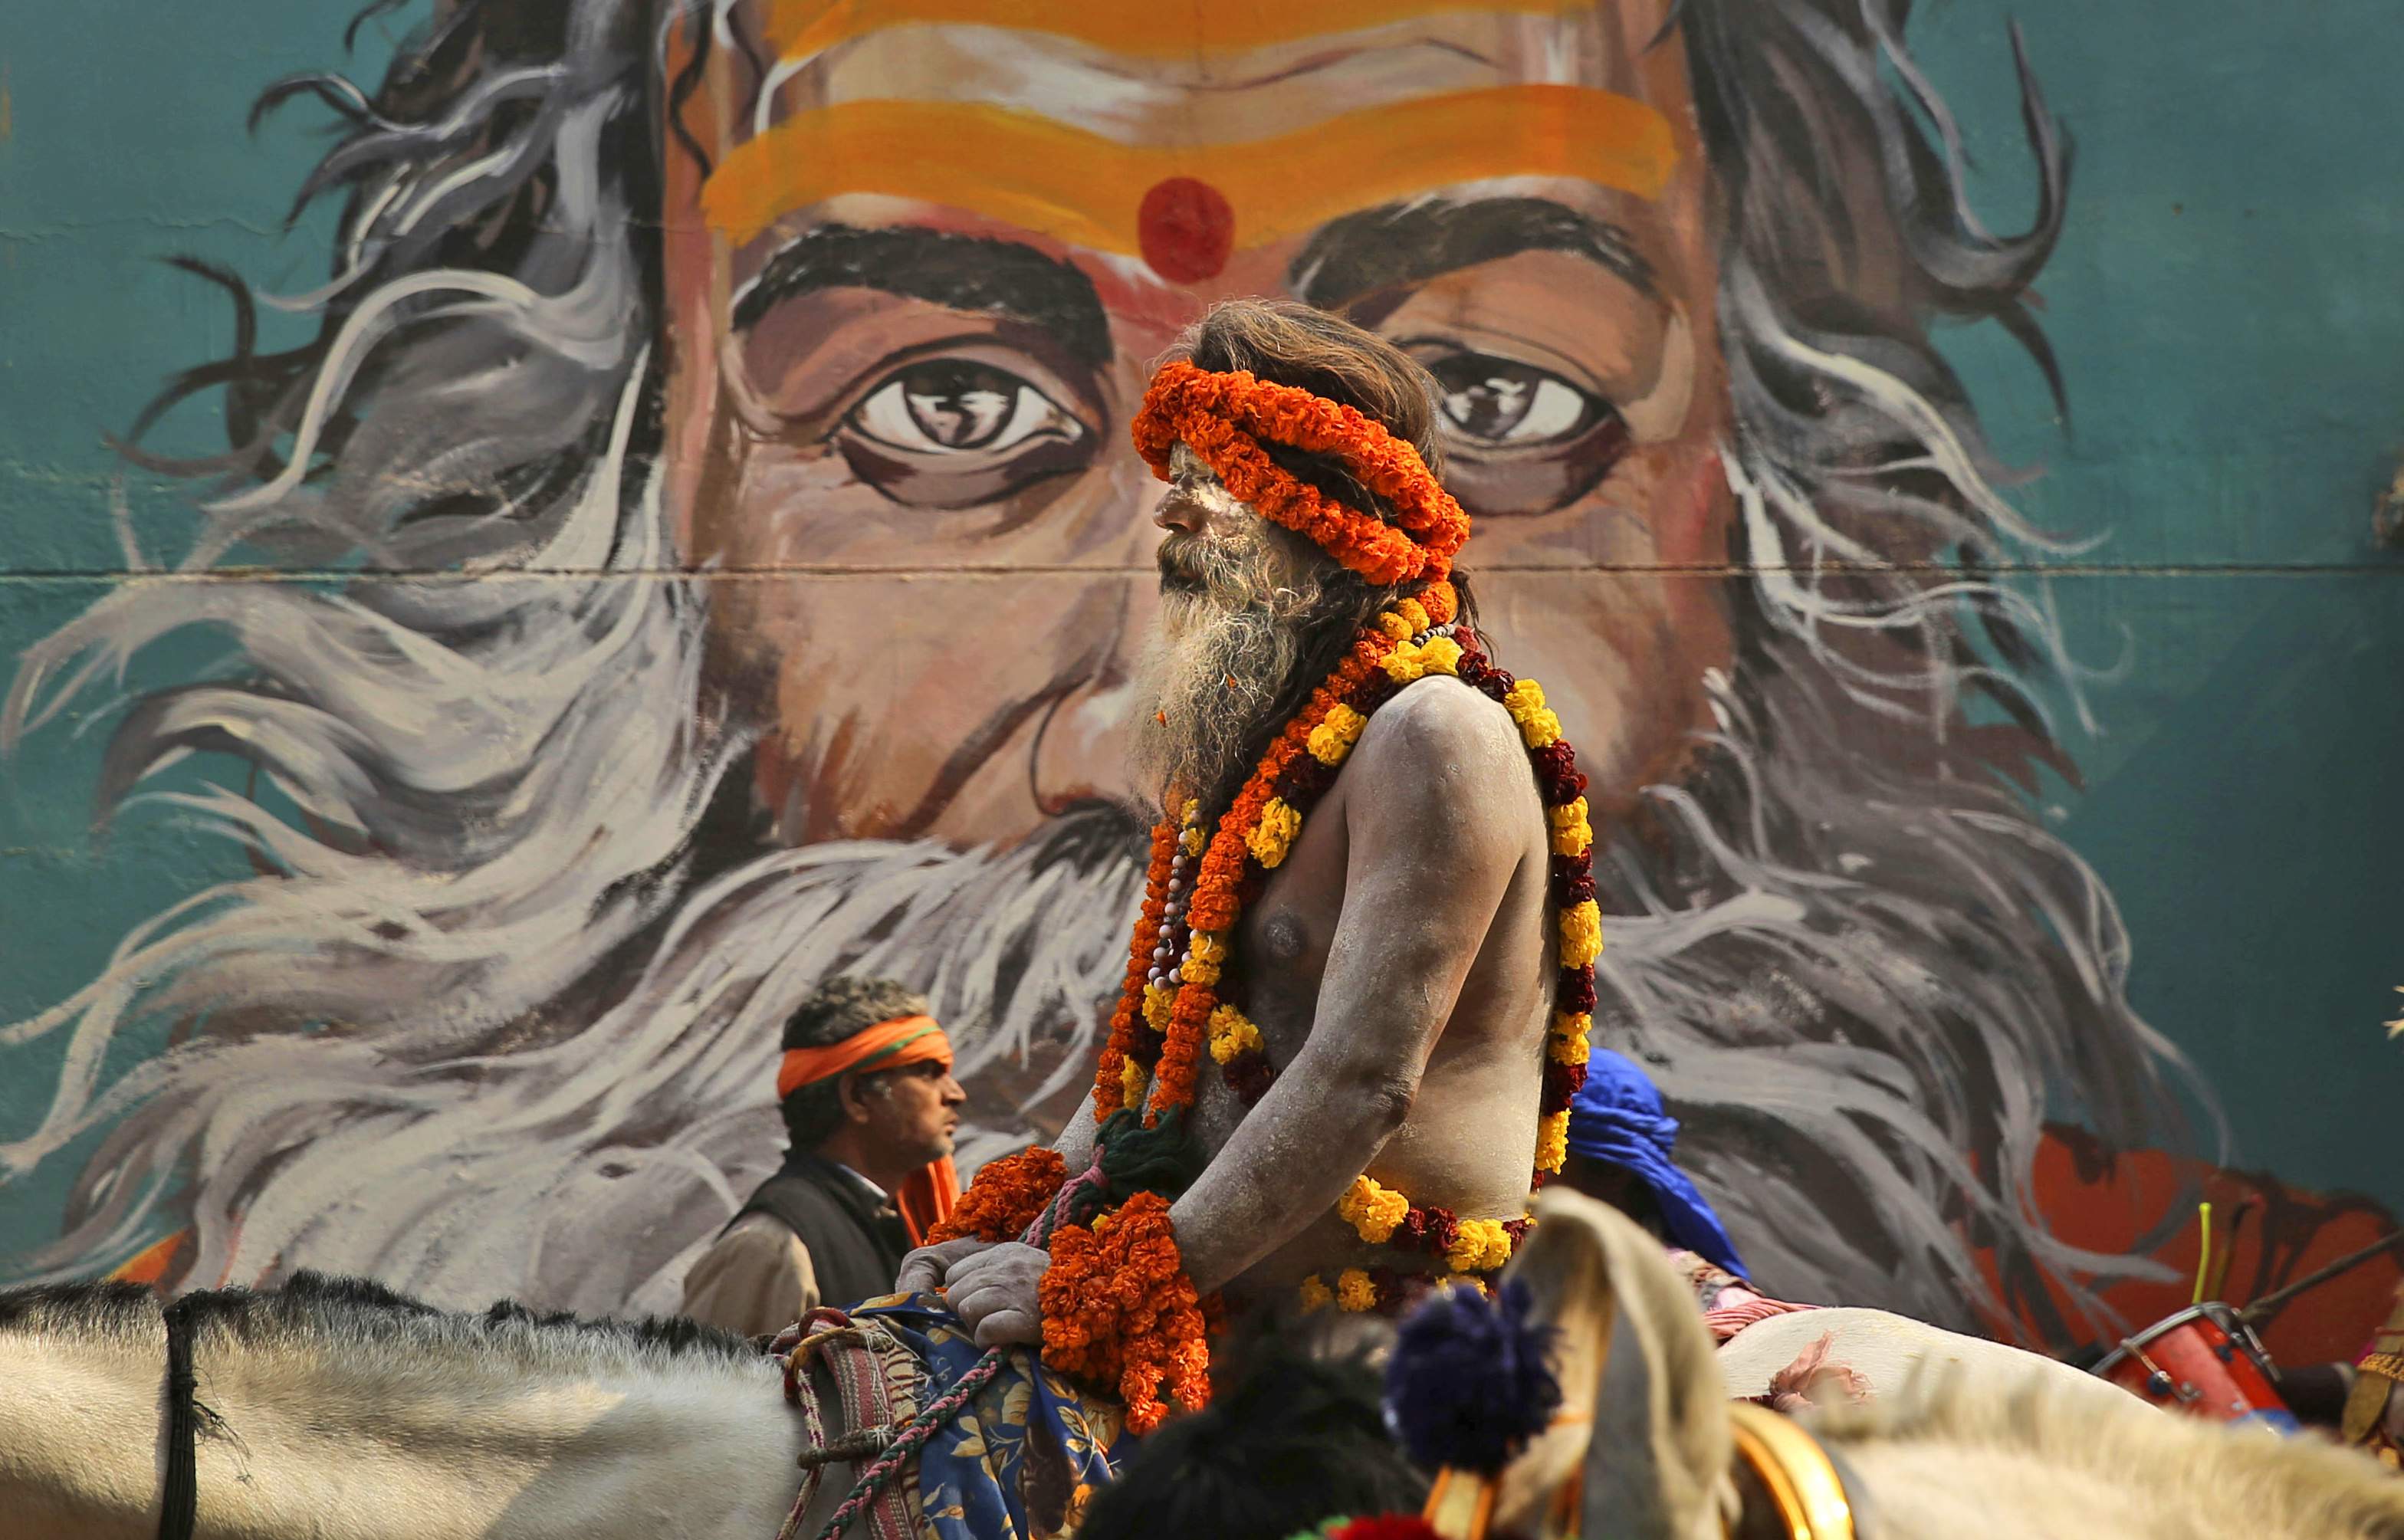 IN PICTURES: 'Naga baba', the naked Hindu sadhus who only care ab...